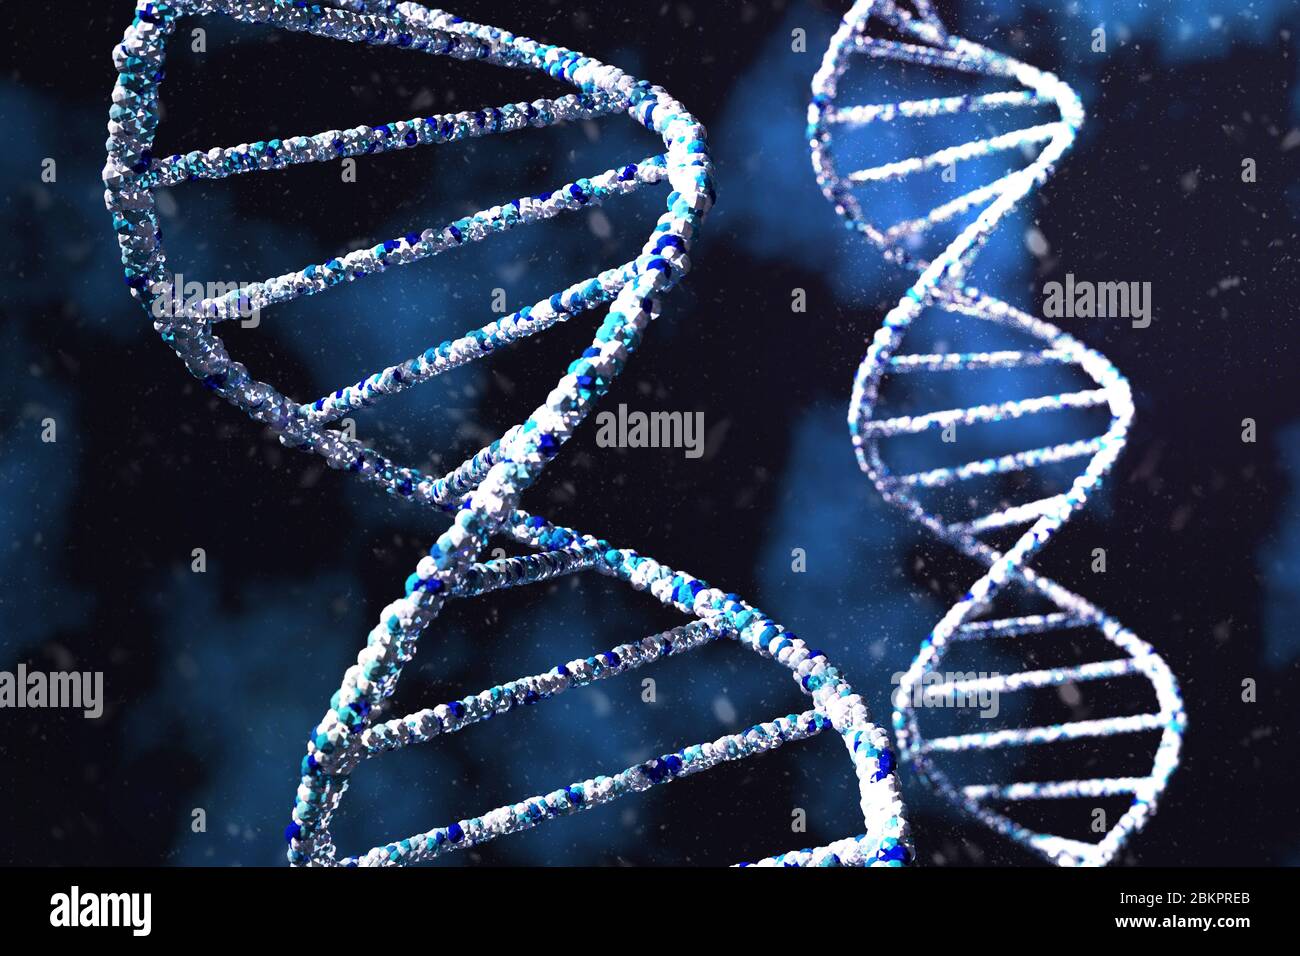 Science Biotechnology DNA 3D illustration and abstract illustration. Stock Photo